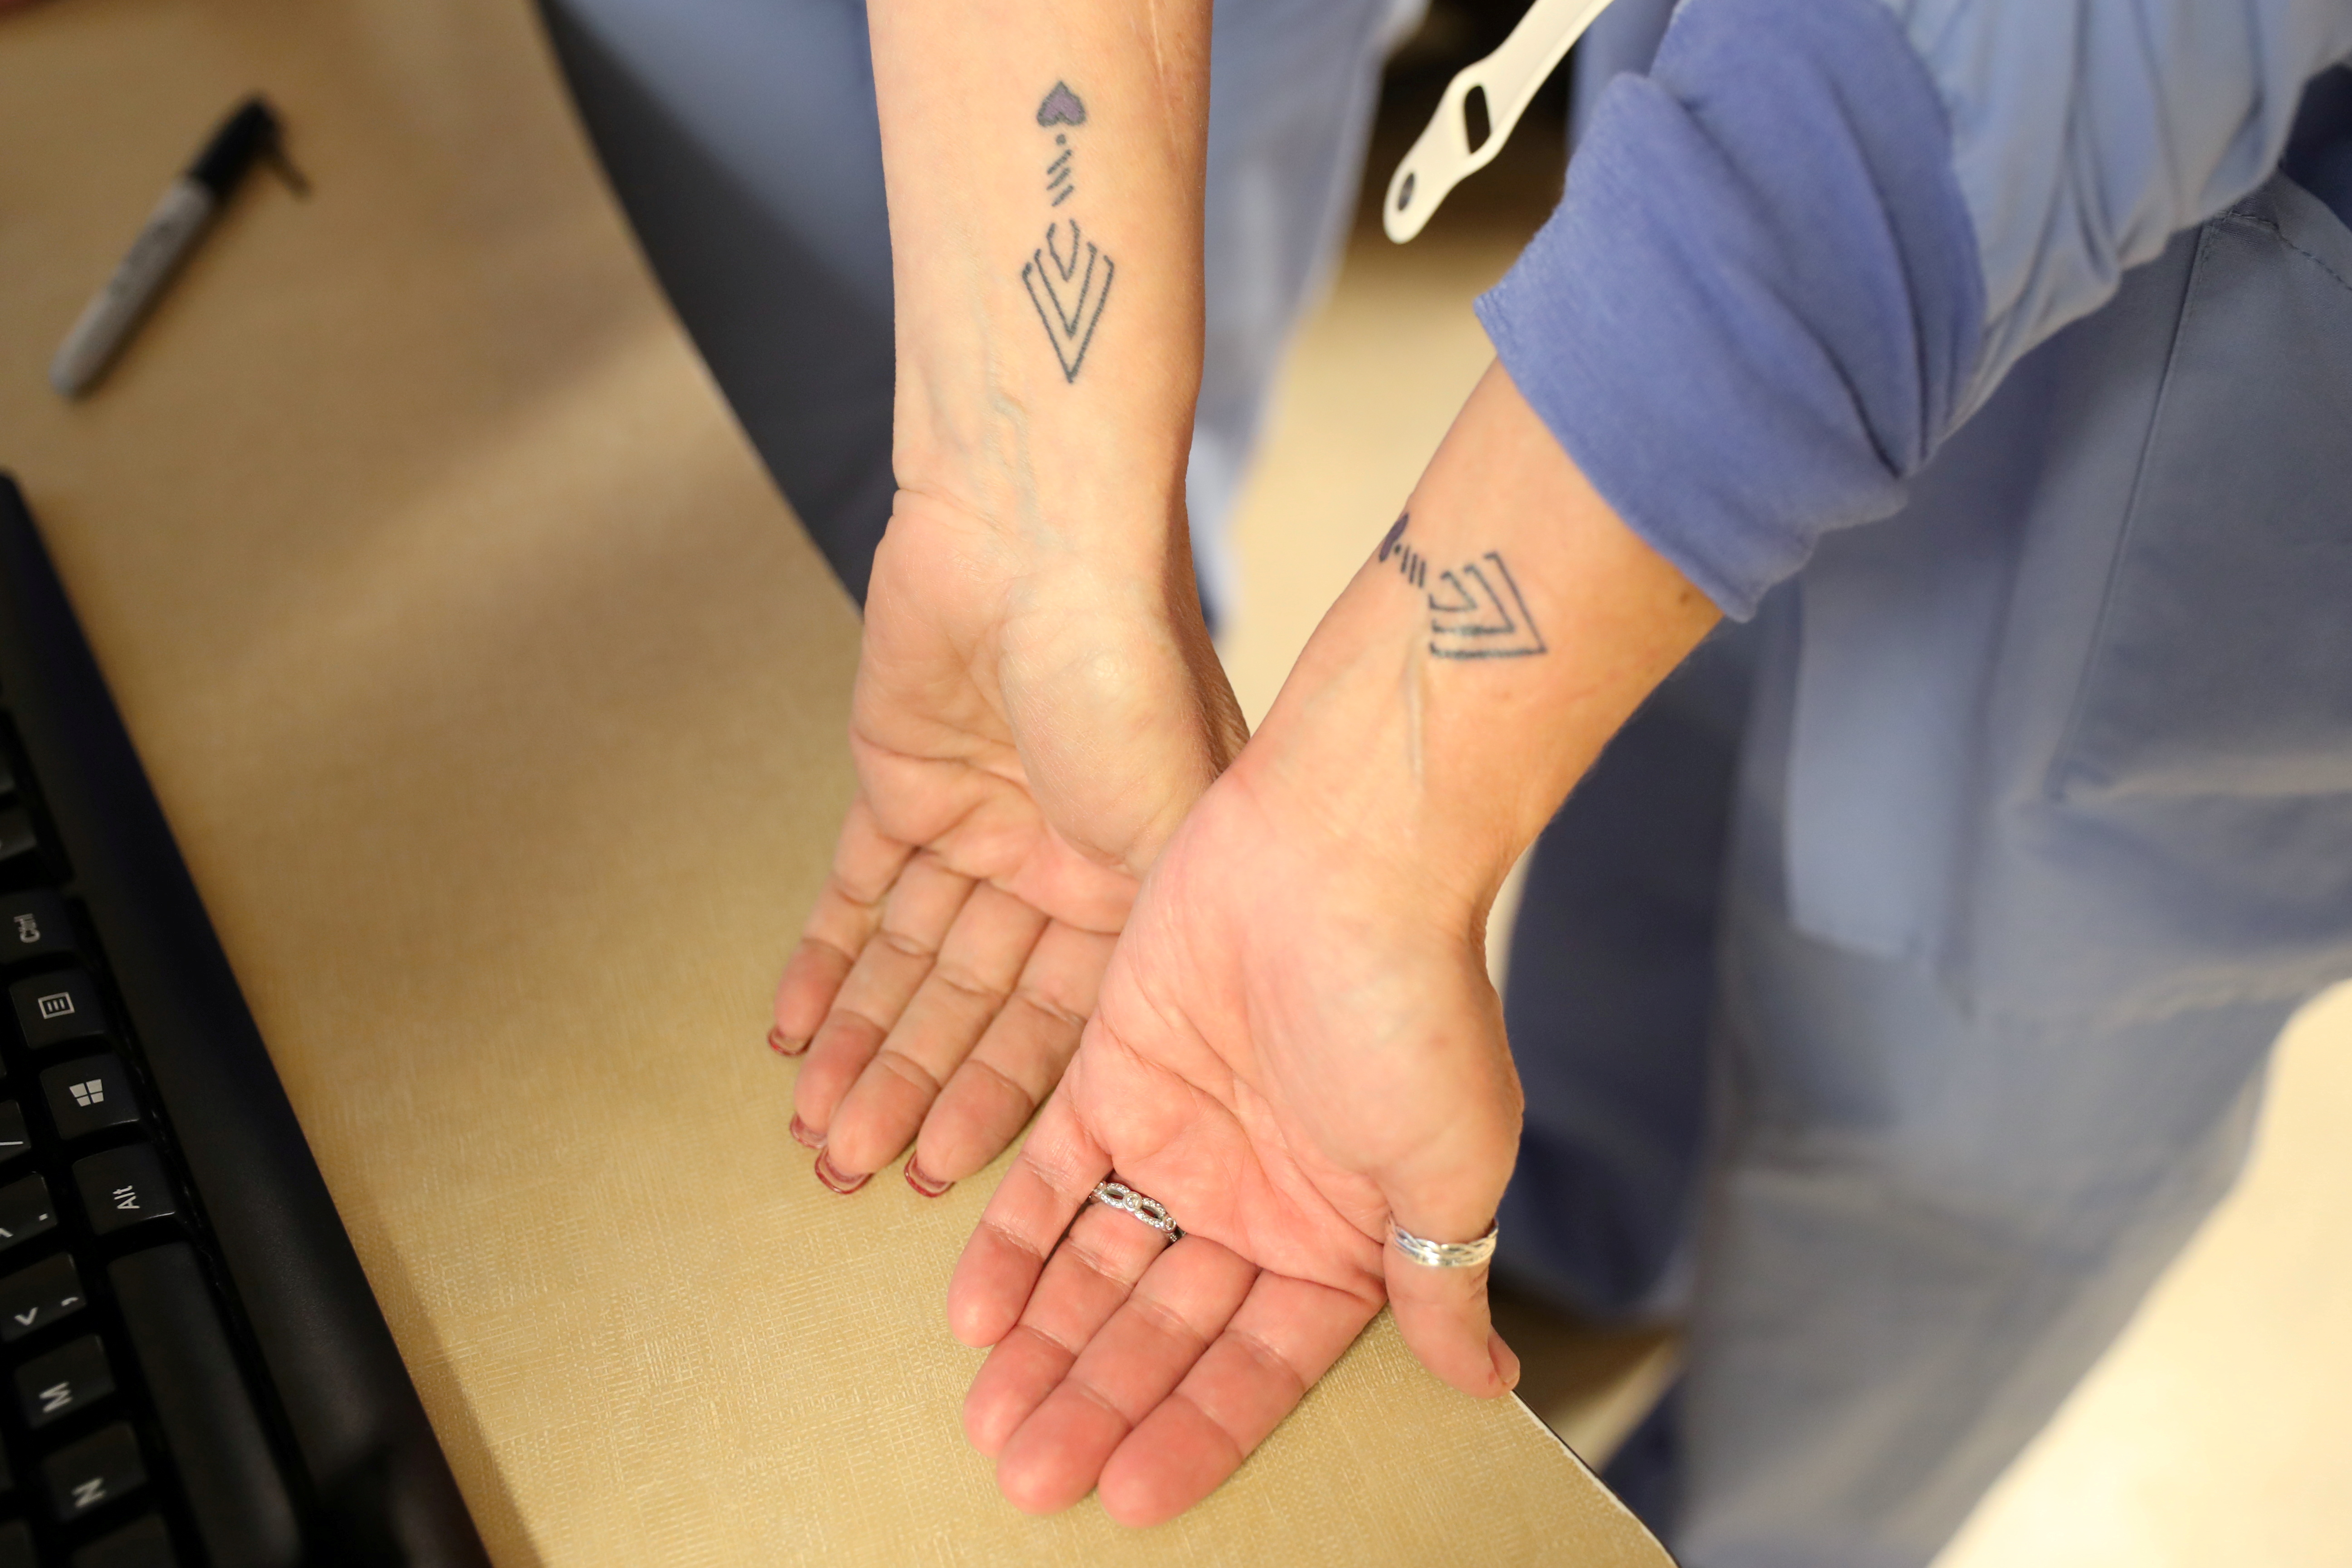 Coronavirus disease (COVID-19) ICU nurses display tattoos they all got to commemorate their bond as frontline workers and the people they have lost, at Providence Mission Hospital in Mission Viejo